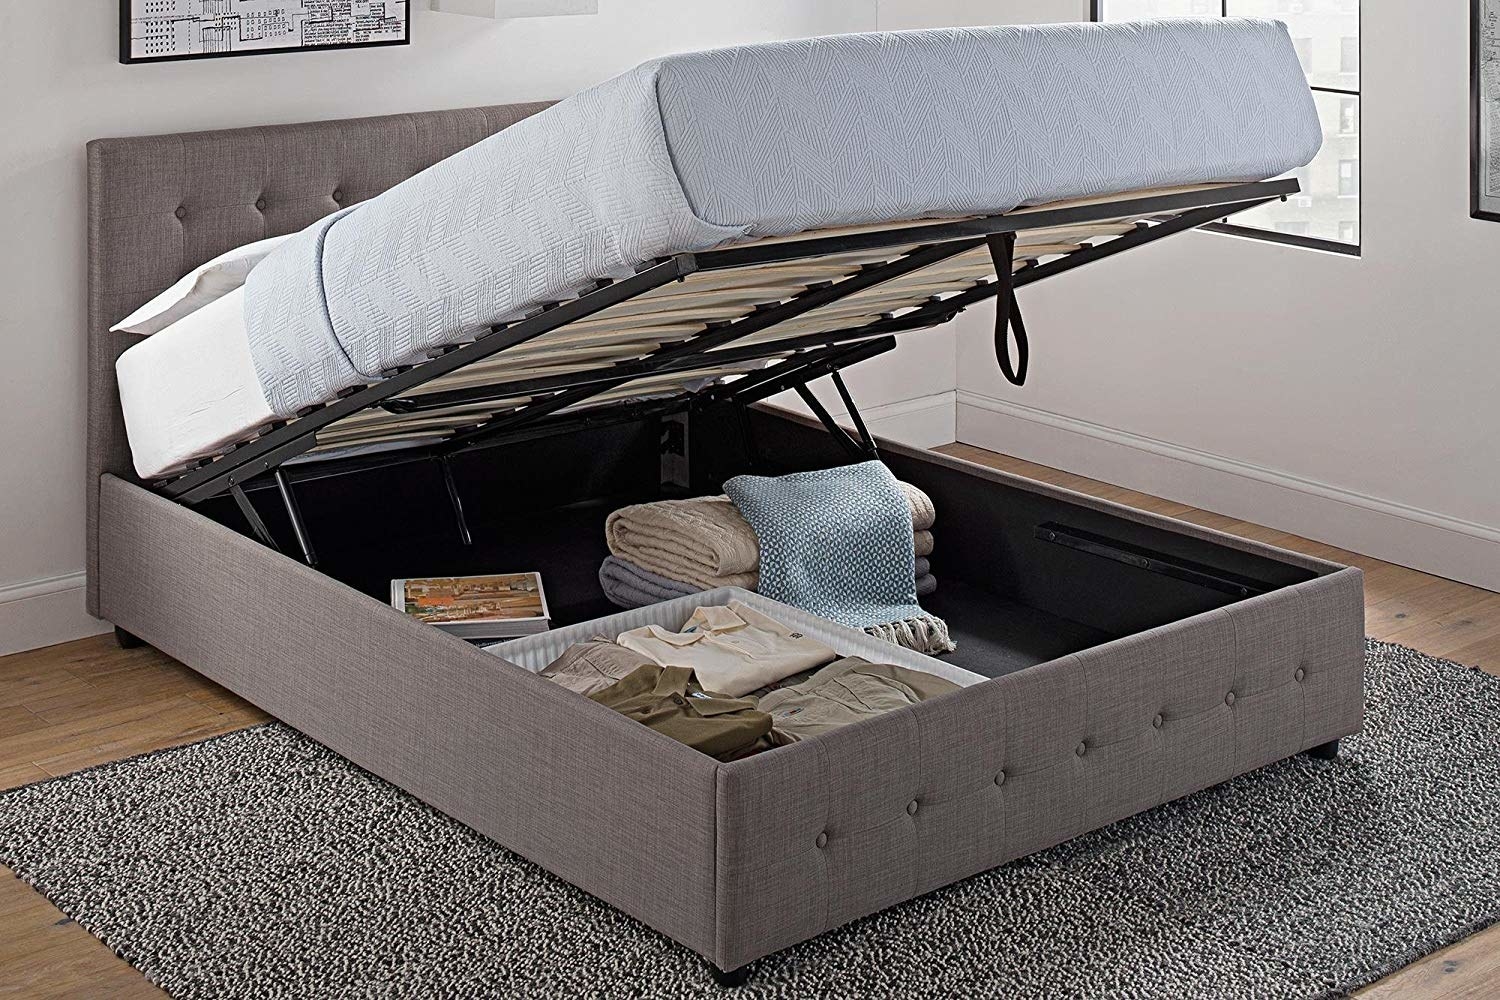 the bed lifted with things stored underneath